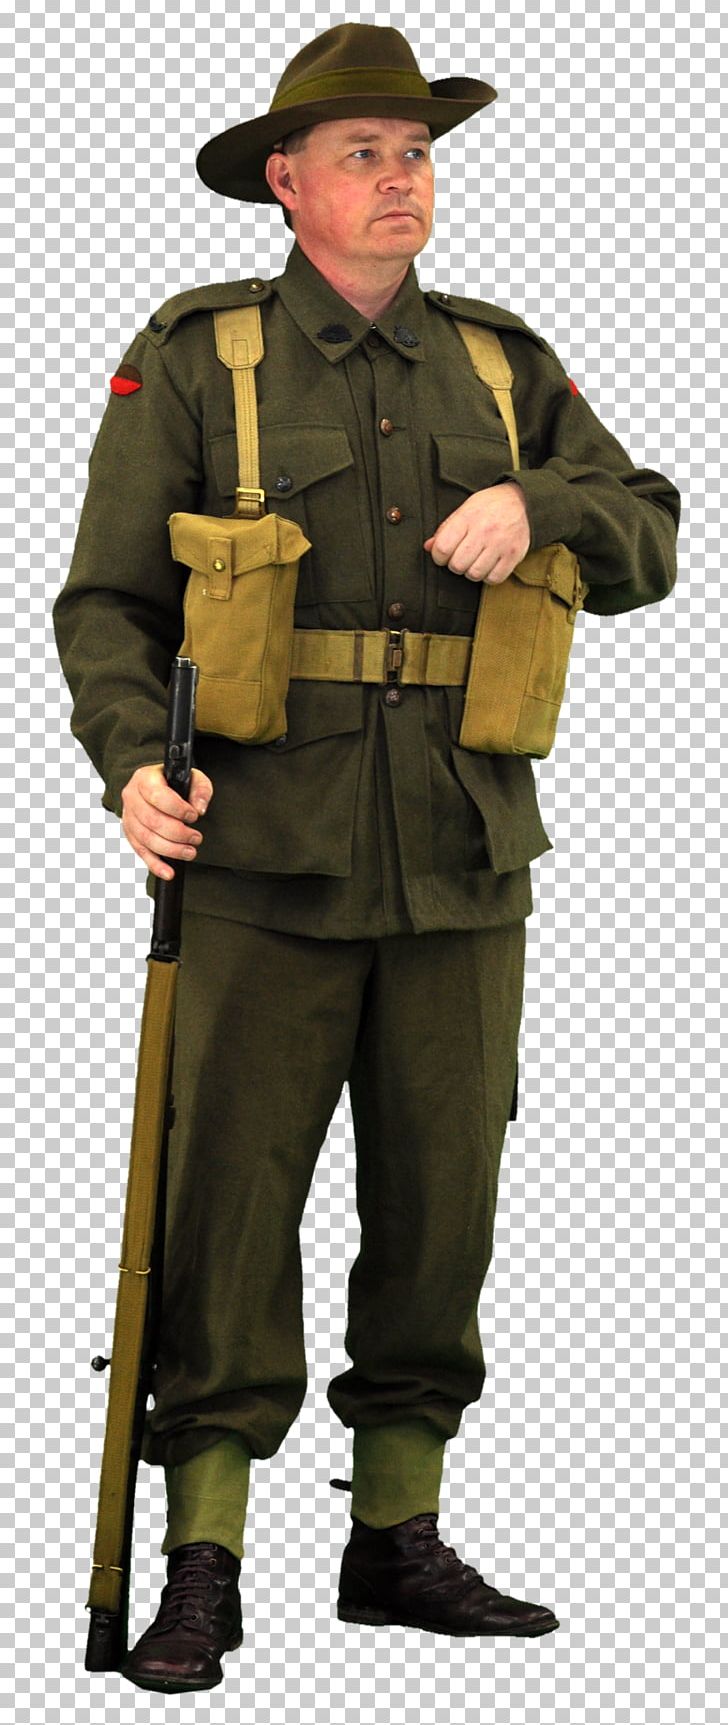 Soldier Second World War Military Uniform Army PNG, Clipart, Army, Army Officer, Costume, First World War, Infantry Free PNG Download